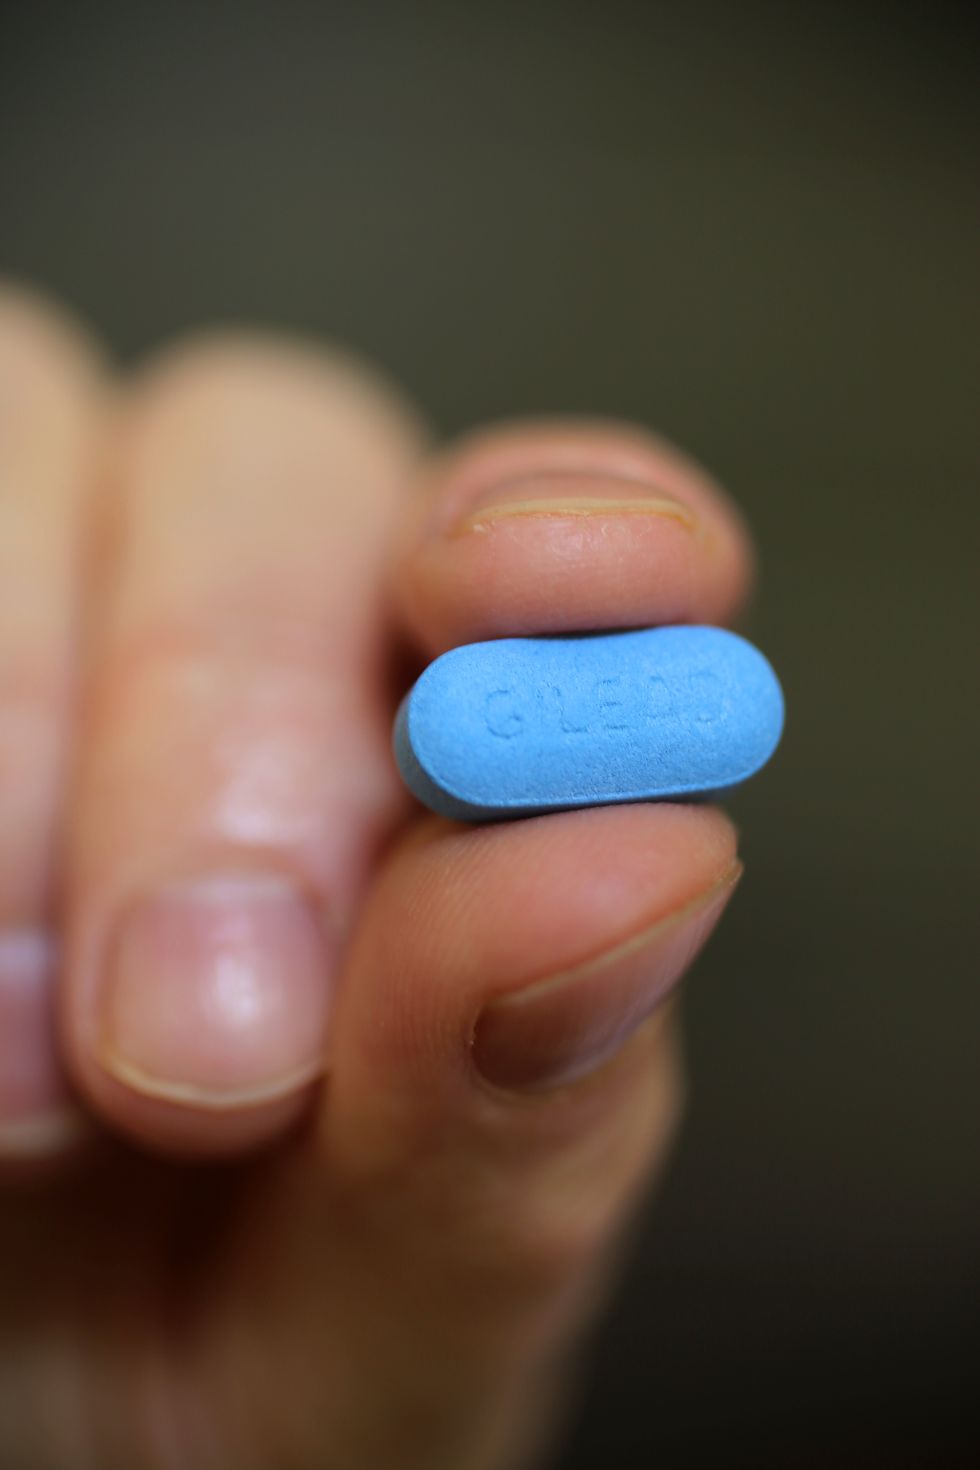 Taking A Pill To Prevent HIV